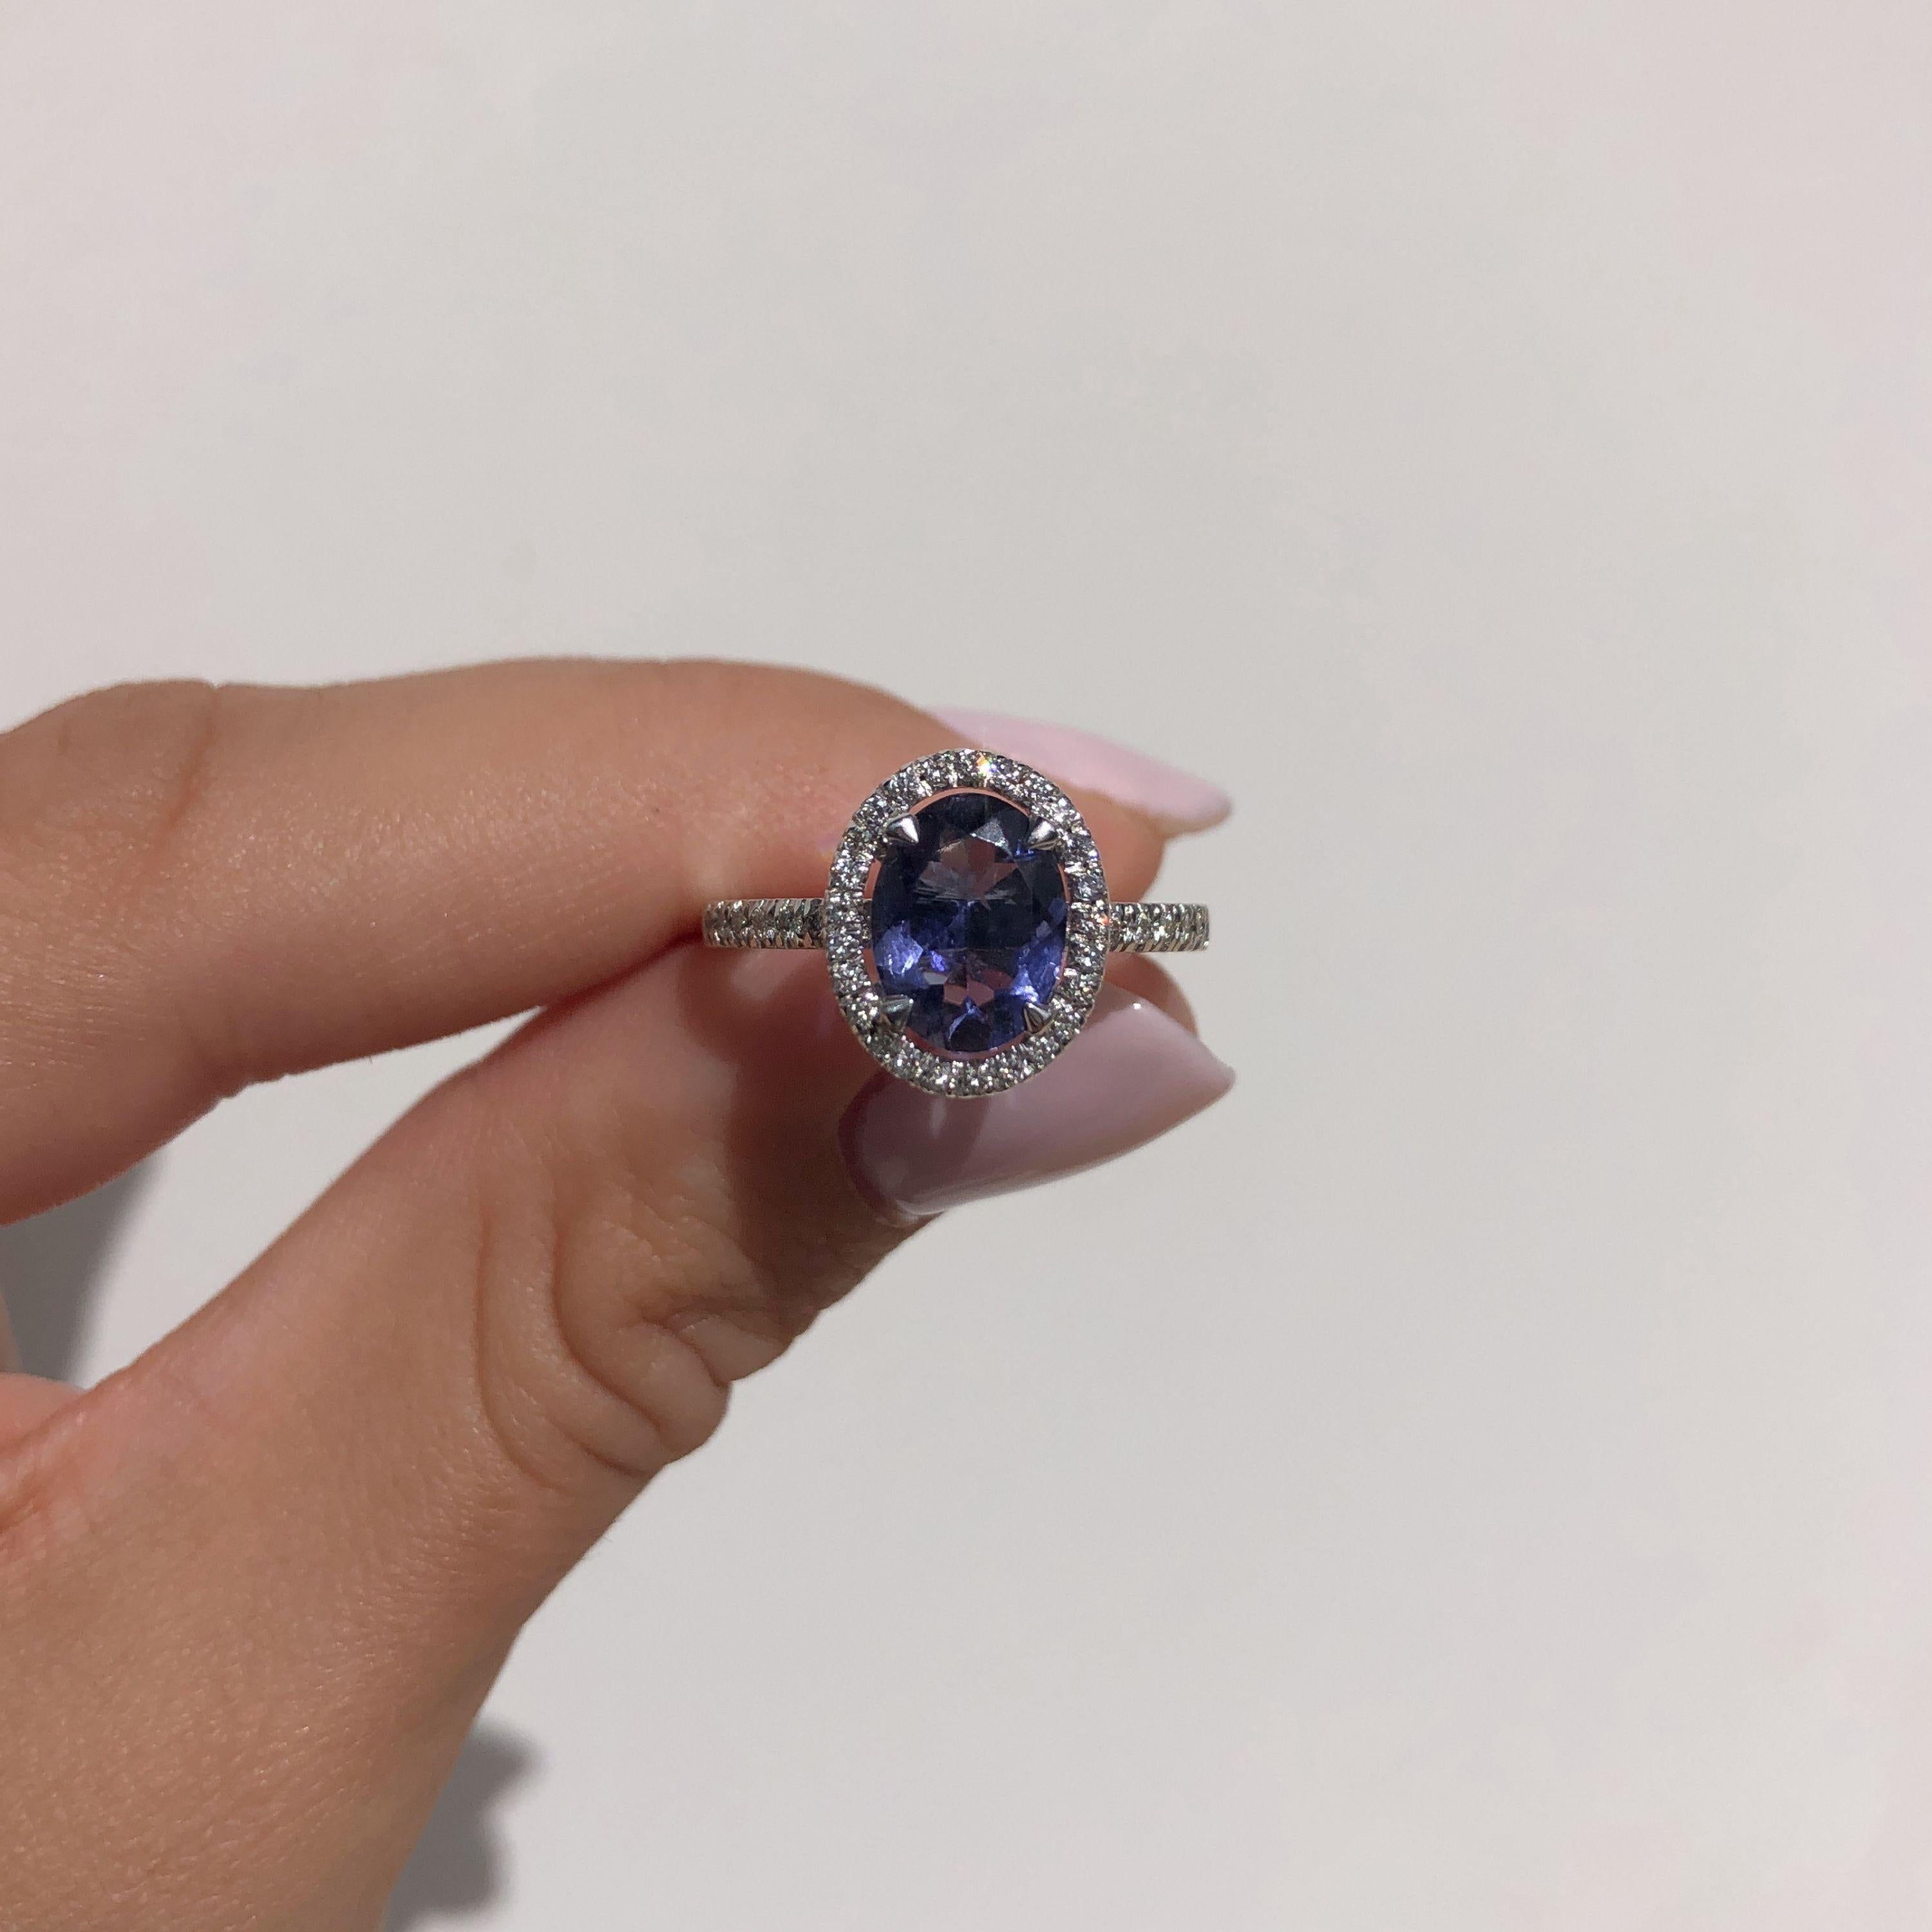 1.56 Carat Oval Tanzanite and Diamonds Halo Ring in White Gold - Shlomit Rogel For Sale 1